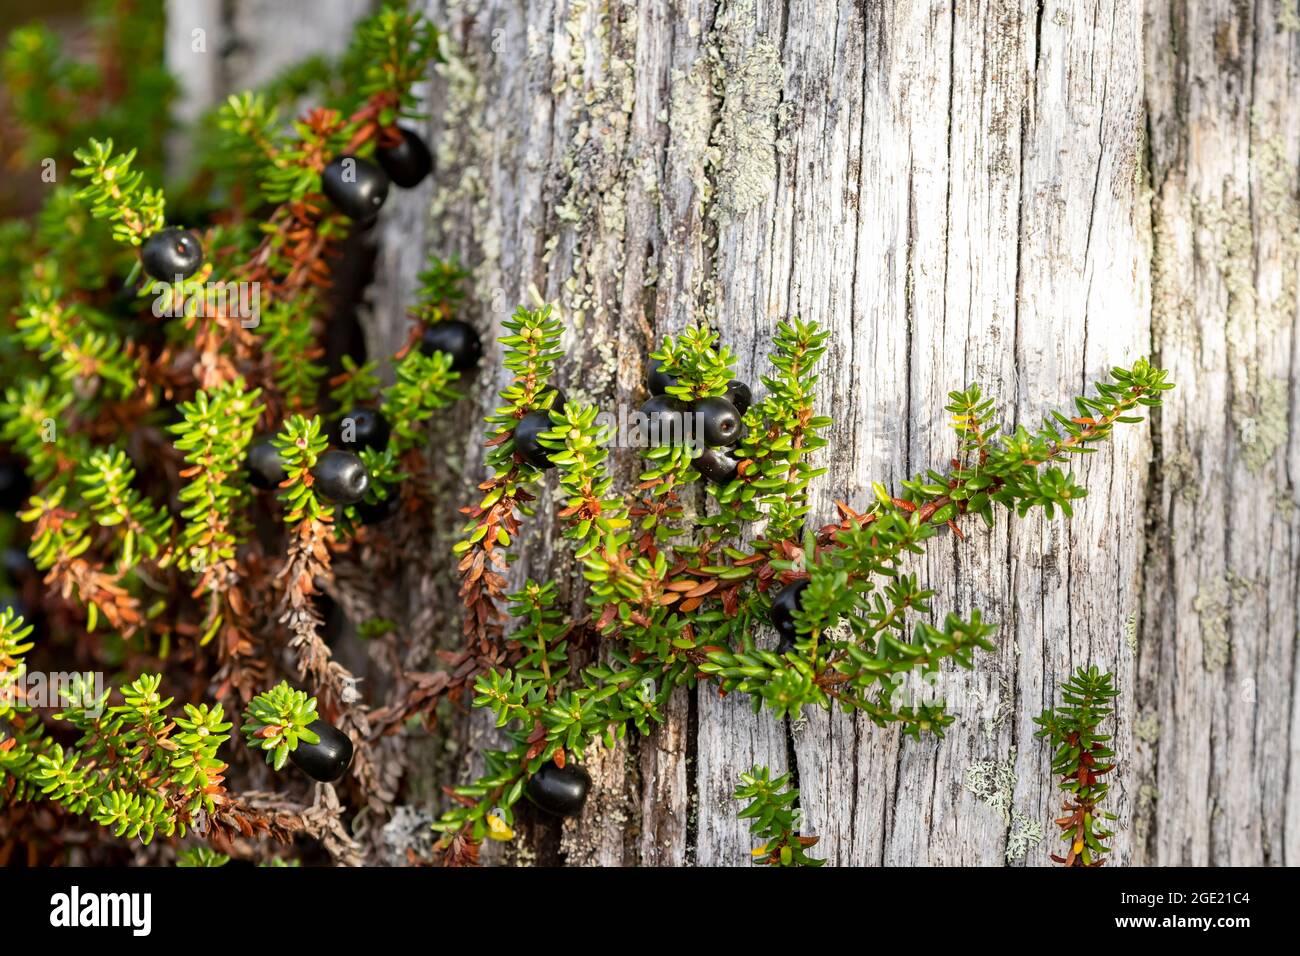 Ripe berries of crowberry (Empetrum nigrum) ready for picking during autumn in Finnish nature Stock Photo